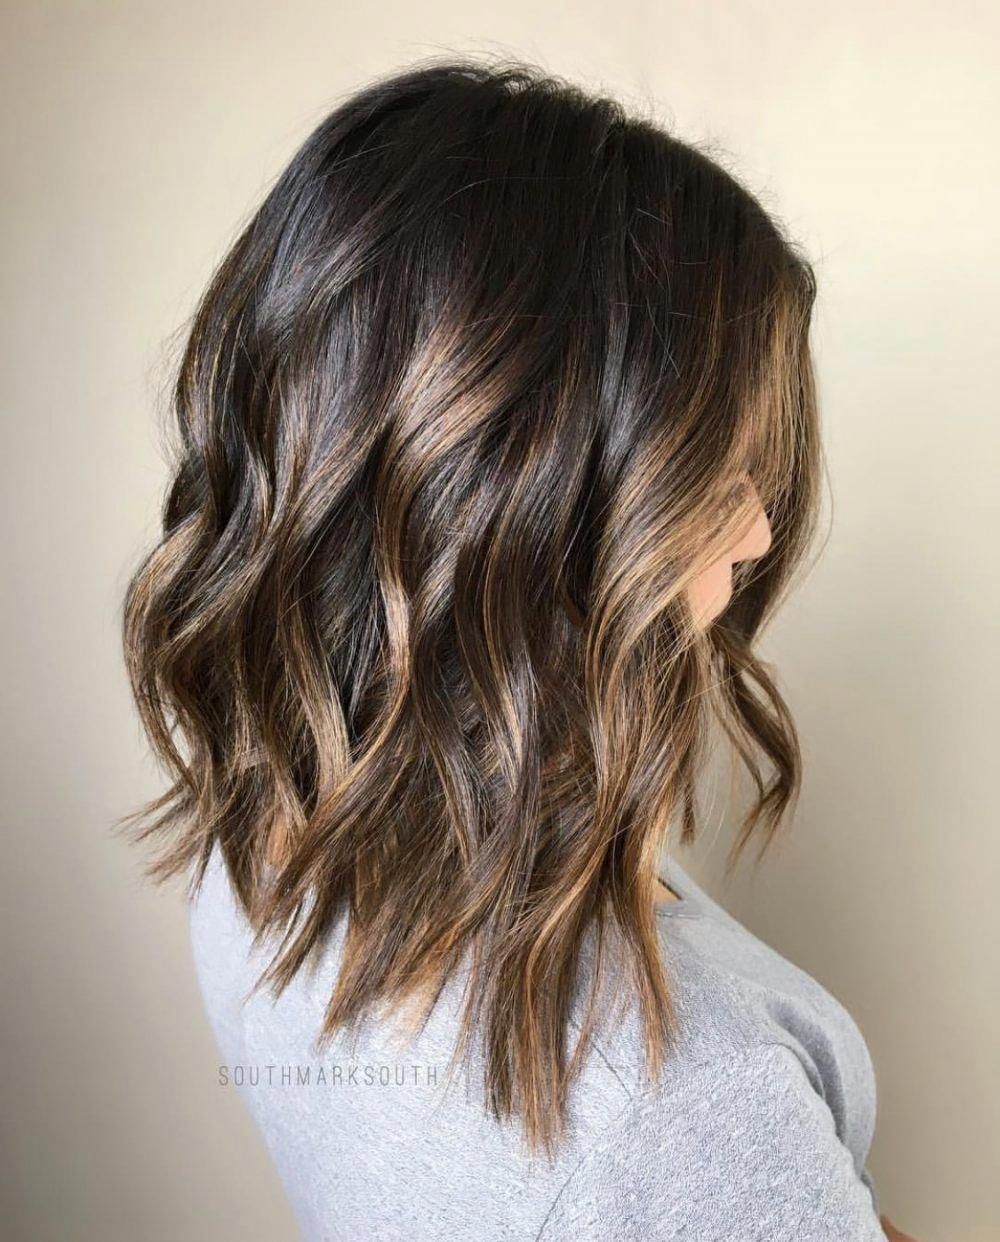 1,000's of Cute Hairstyles, Colors and Advice -   18 hairstyles Bob balayage highlights ideas